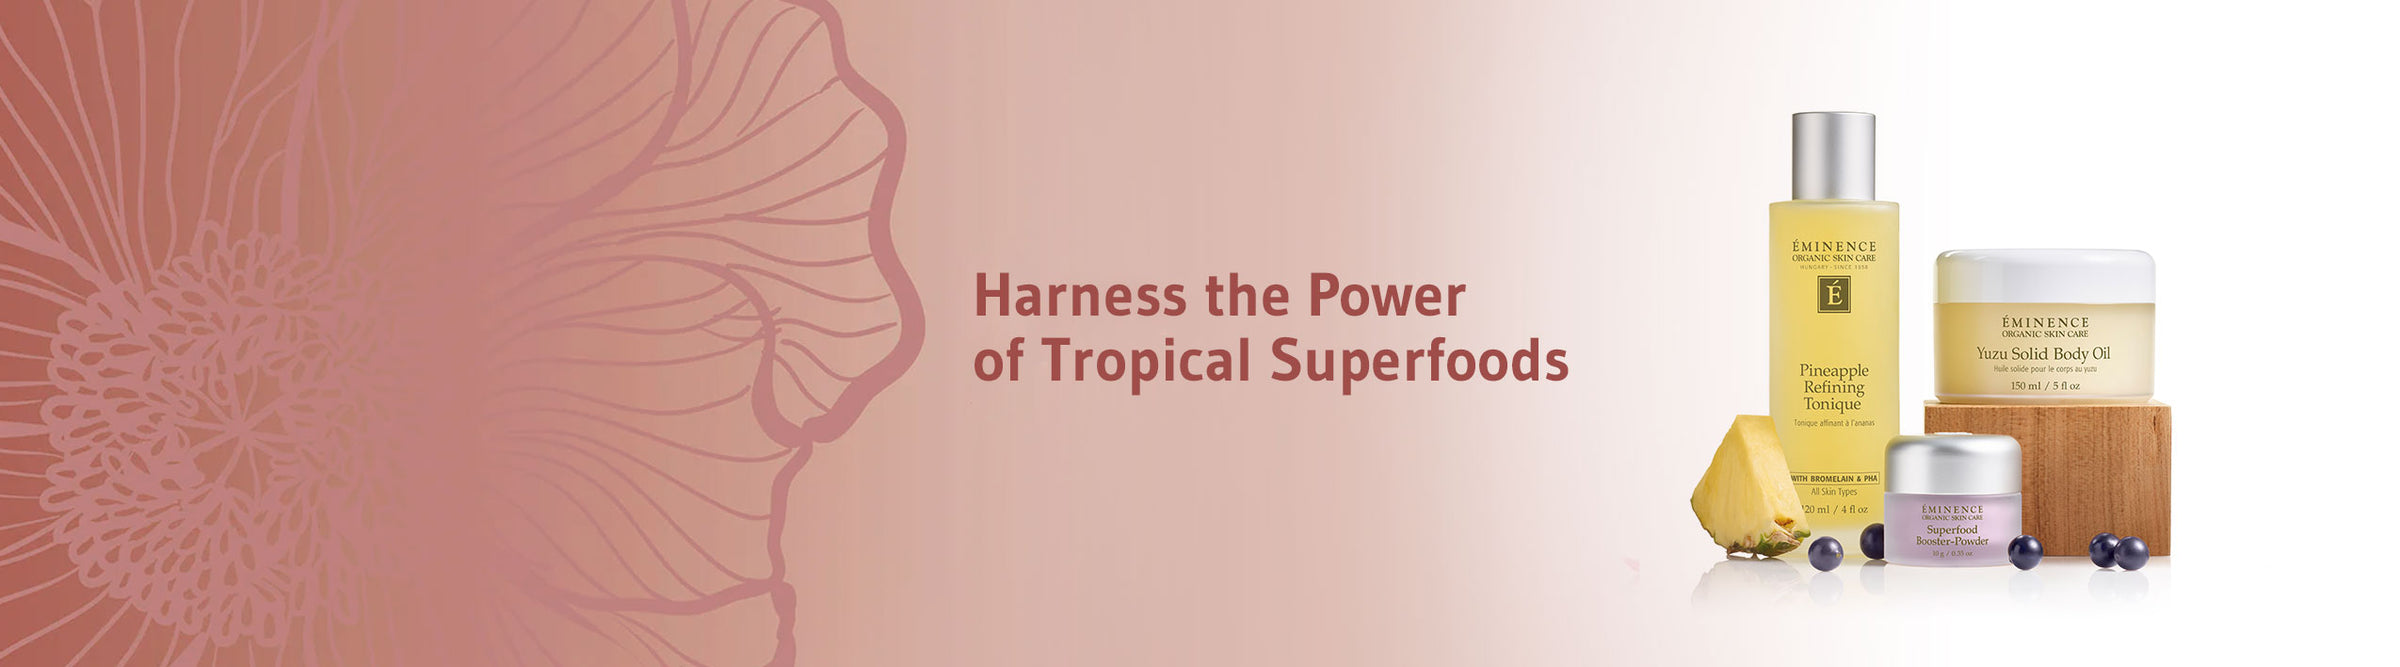 eminence organics tropical superfood collection